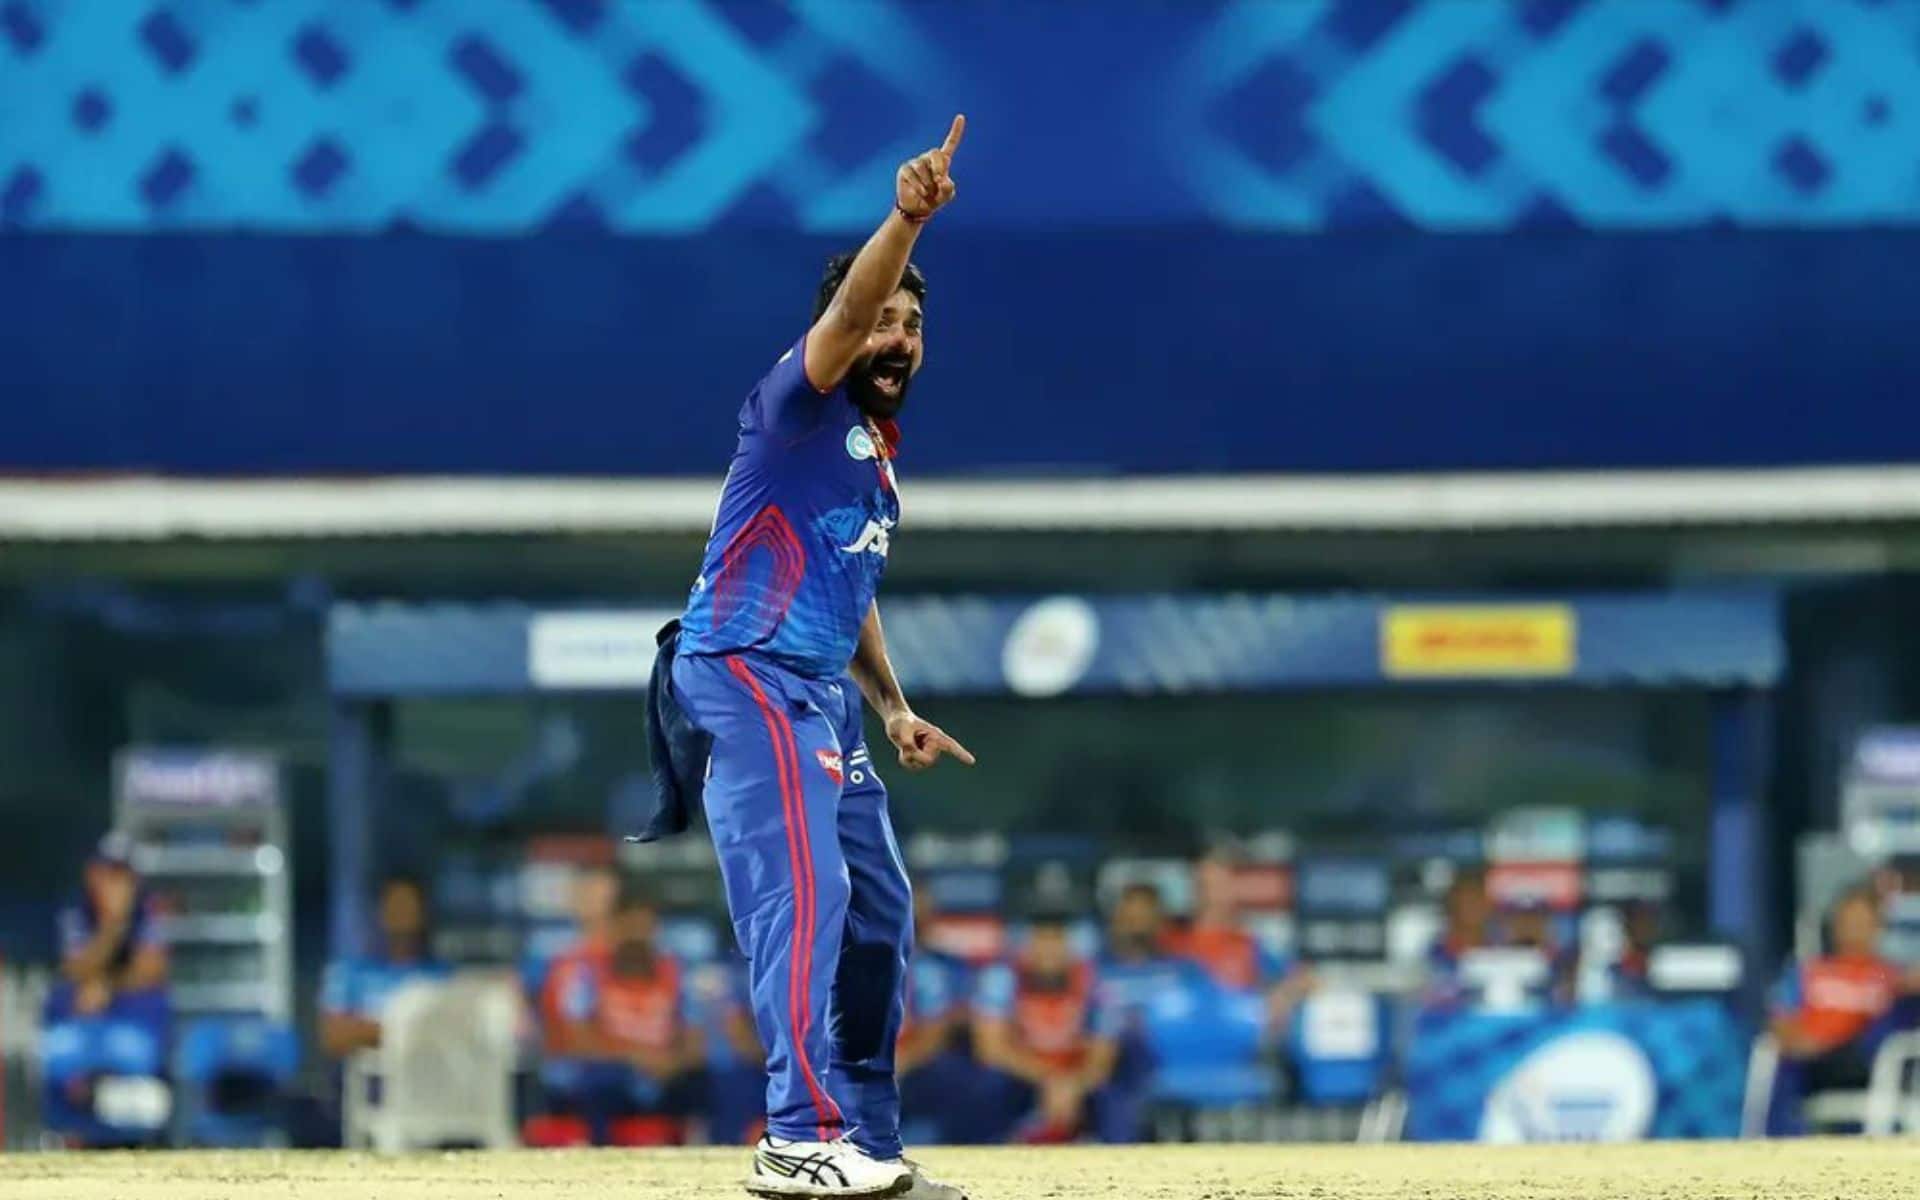 Amit Mishra has conceded 182 sixes in the history of IPL (X.com)